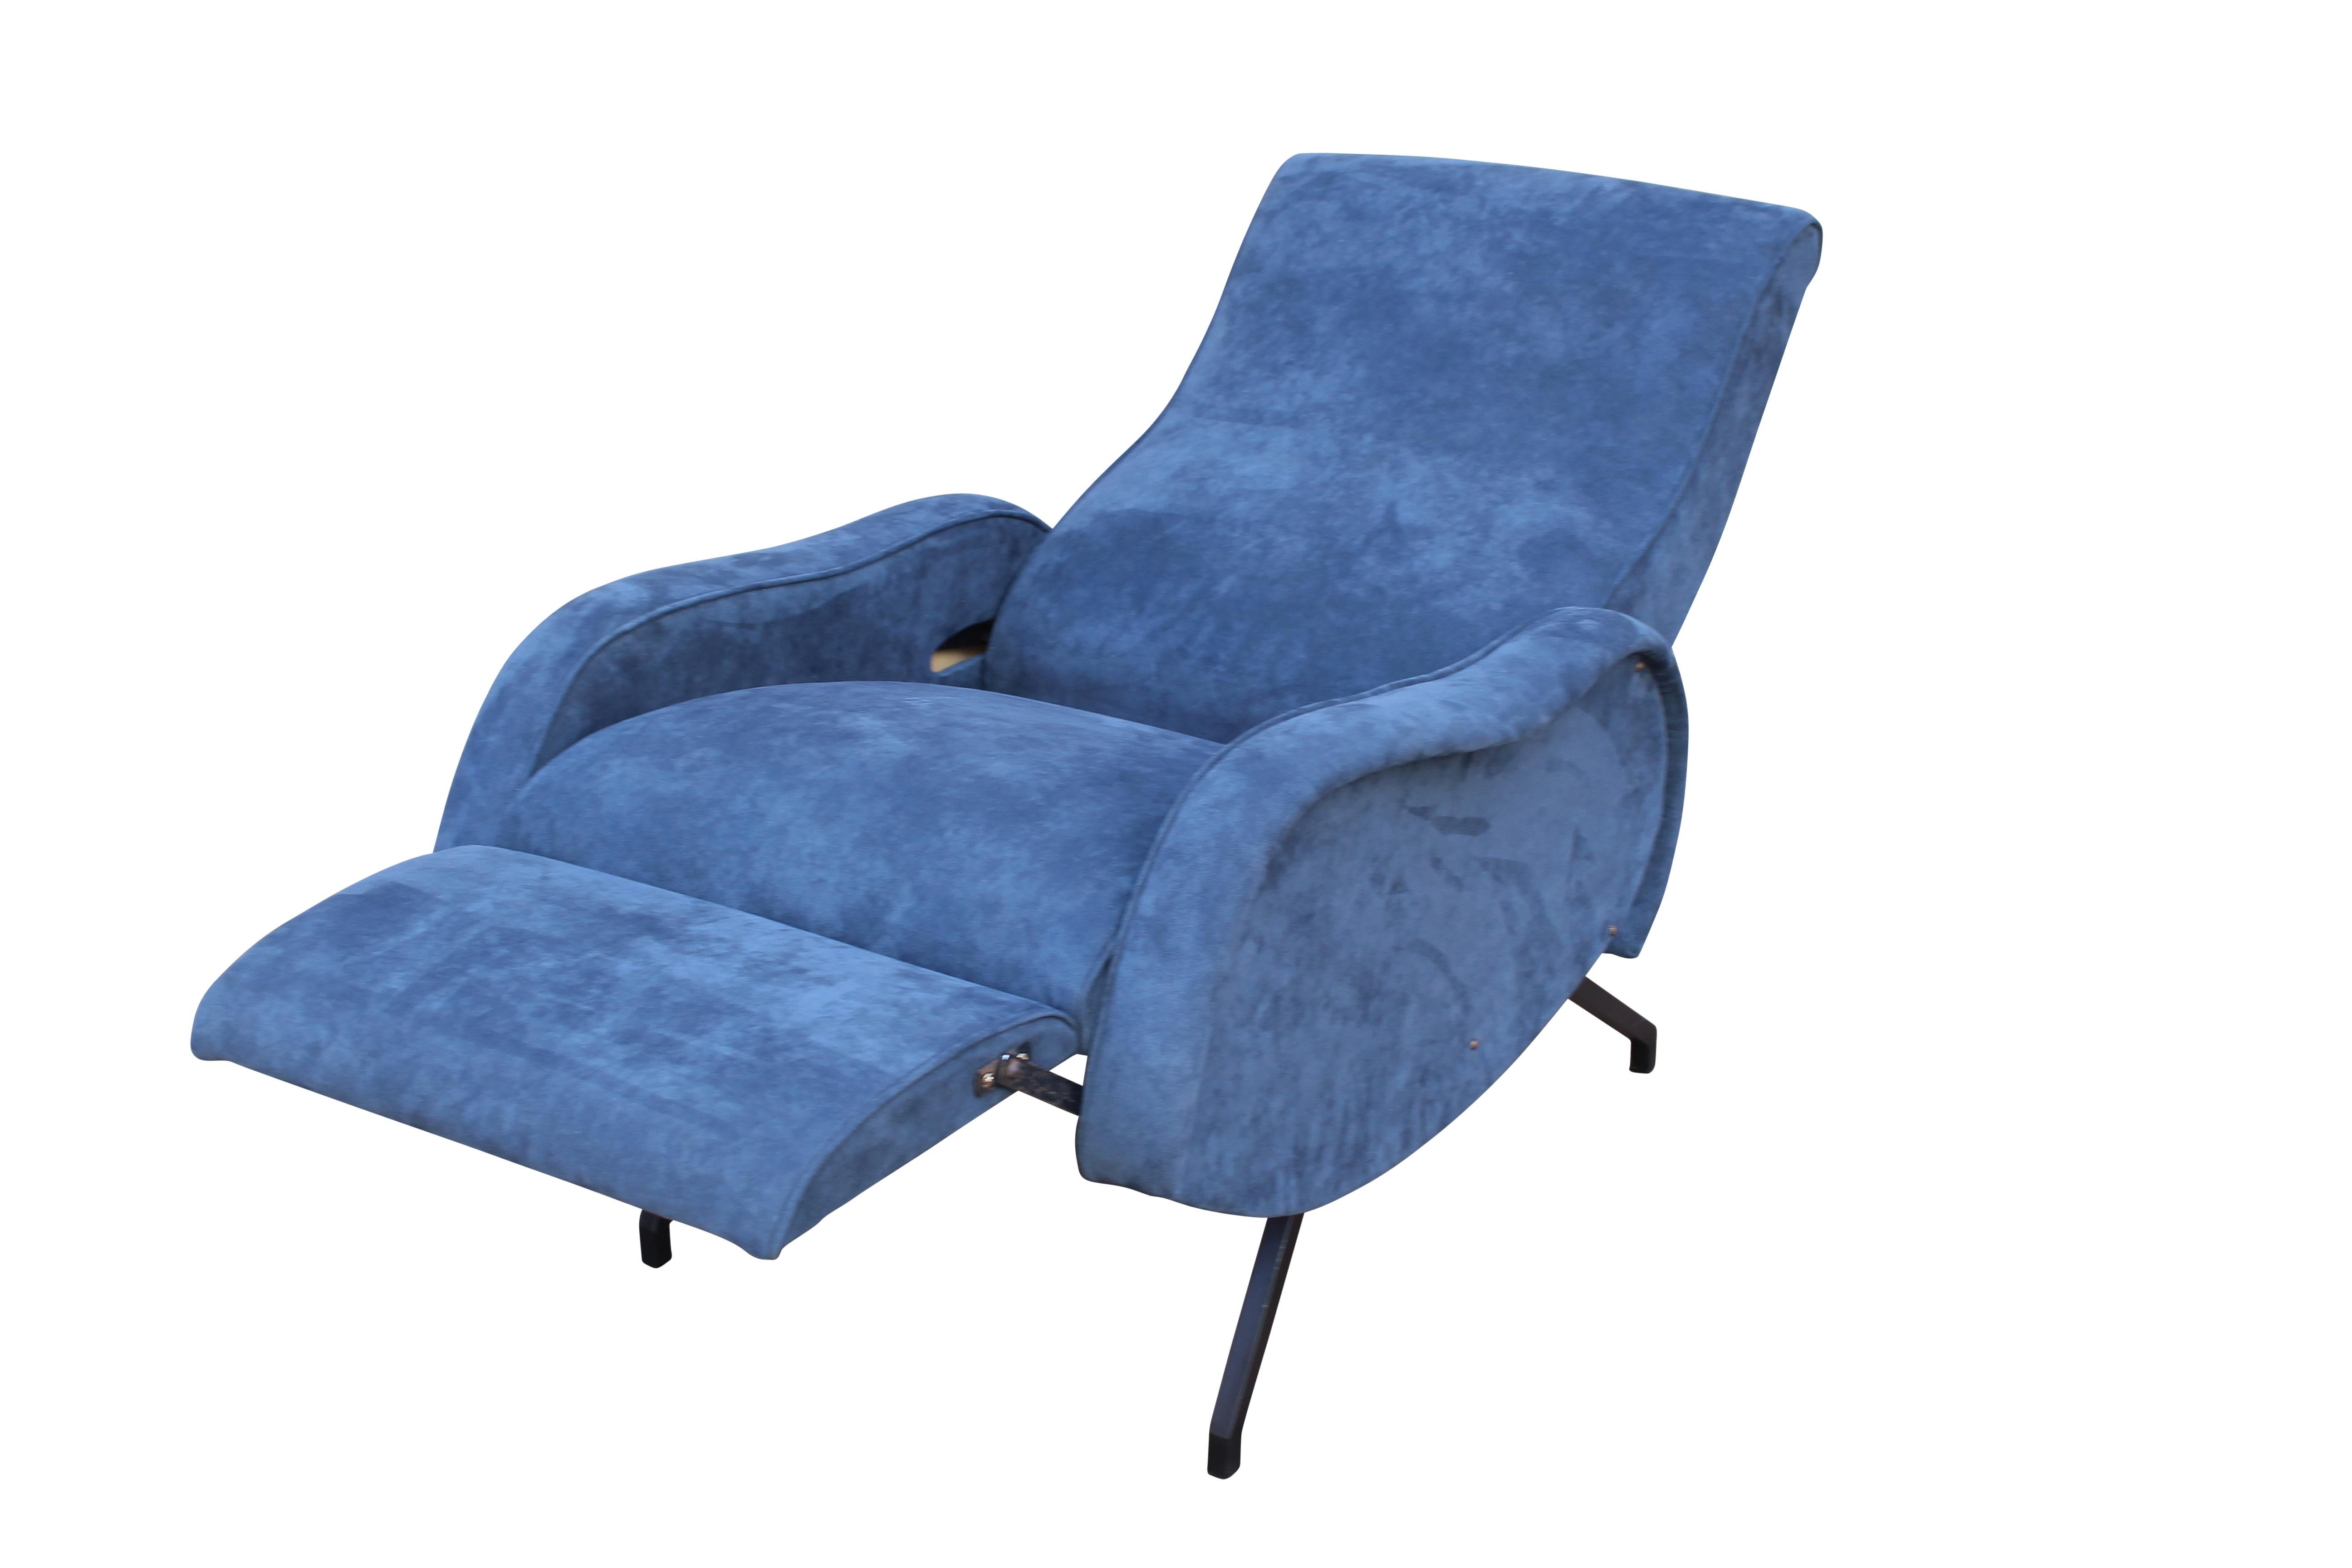 A beautiful 1950s Italian reclining armchair attributed to Marco Zanuso in a high quality deep blue Alcantara upholstery.
 
The chair sits on metal legs and smoothly reclines when you lean back into the chair, one of the most comfortable chairs